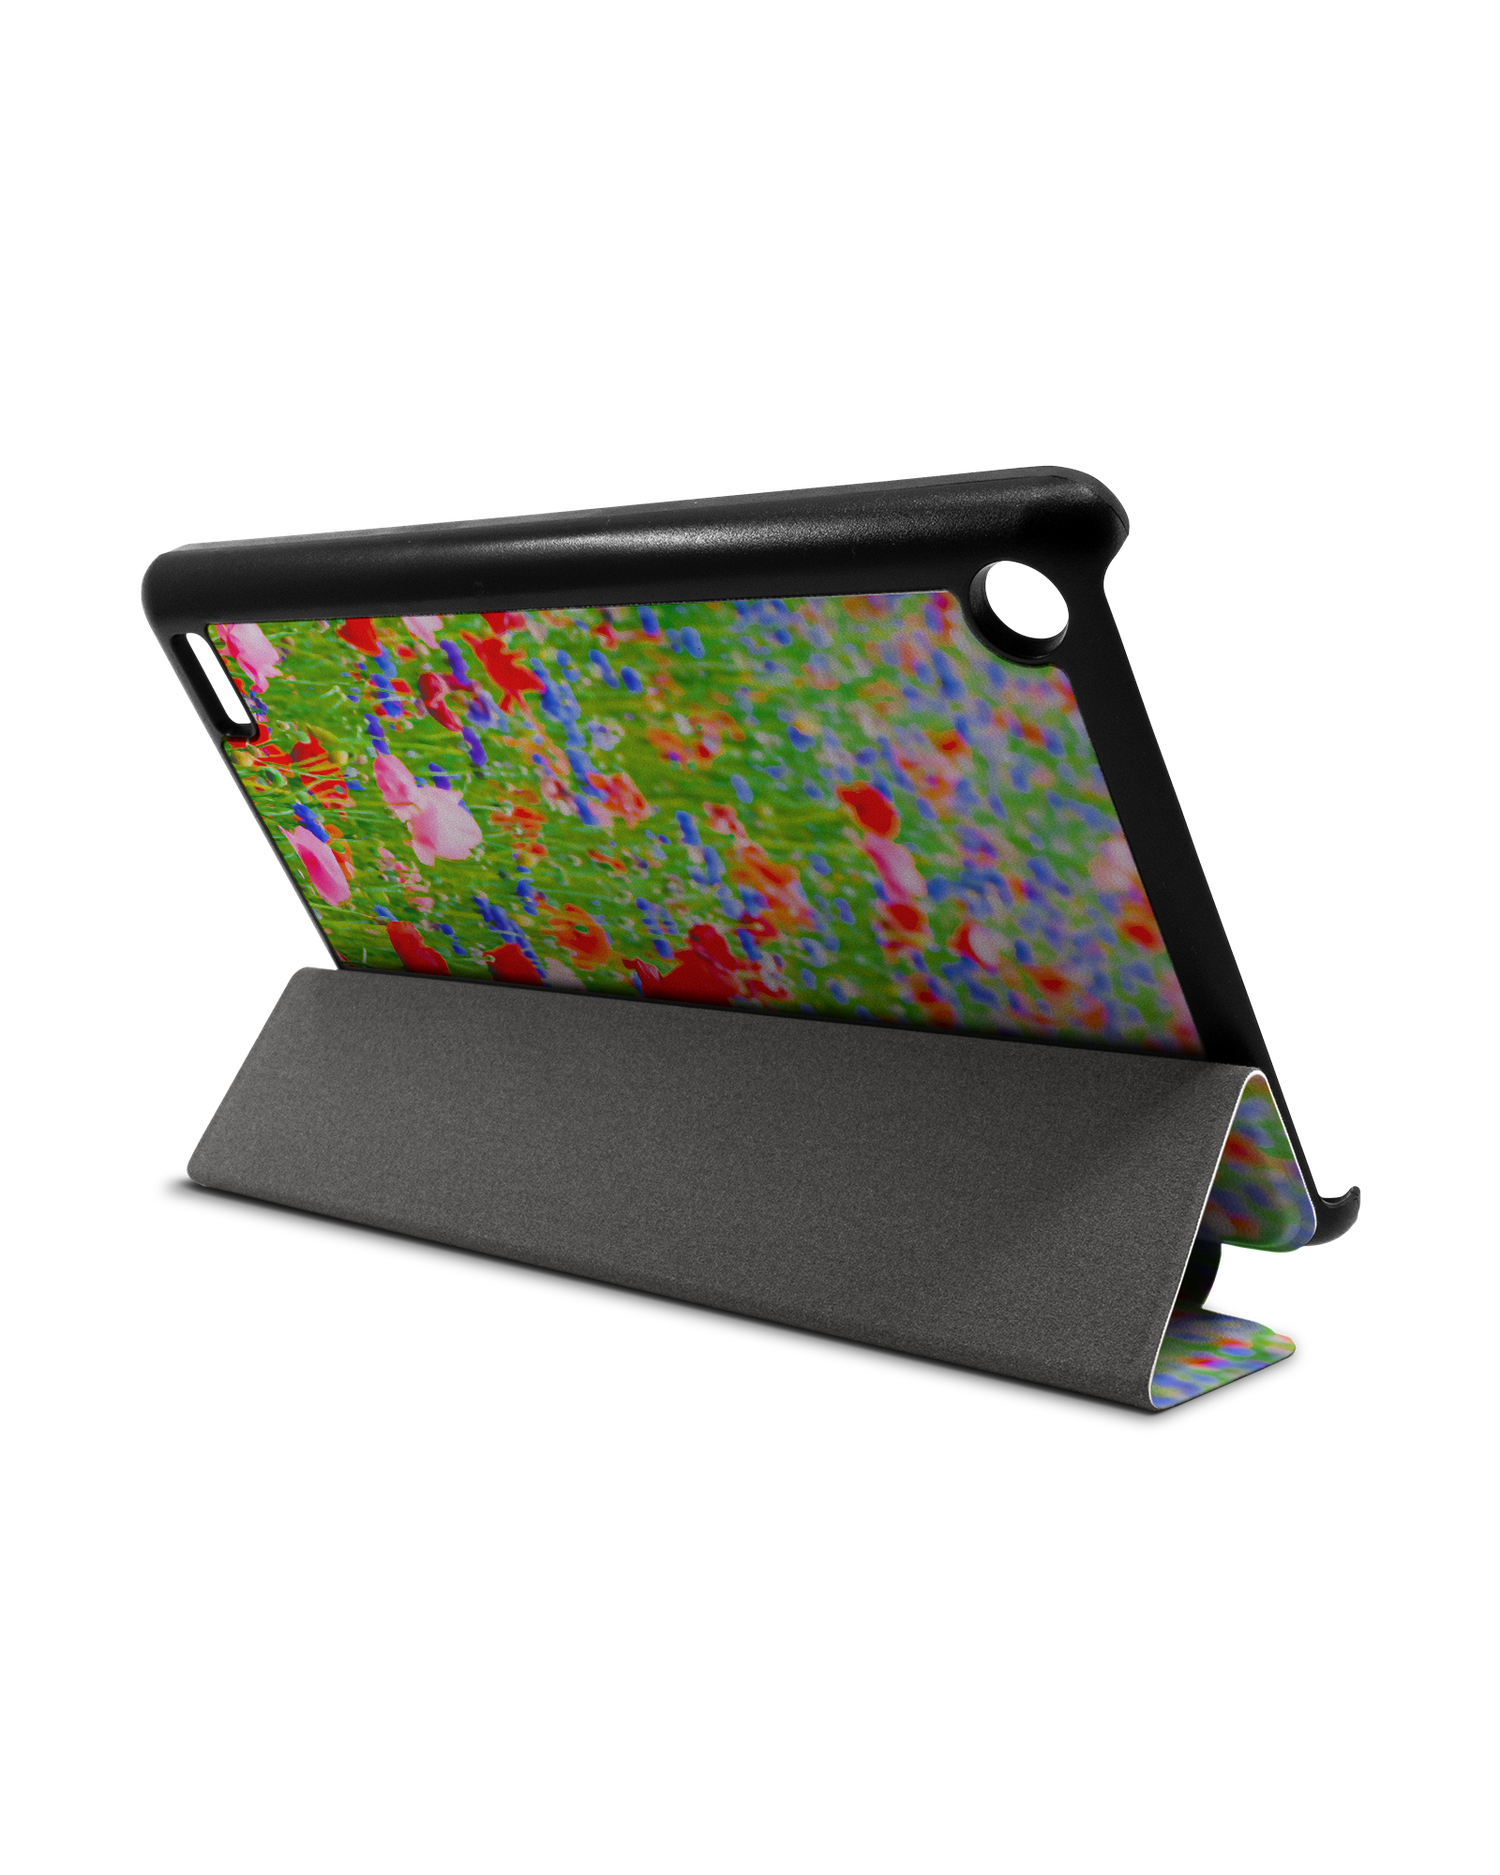 Flower Field Tablet Smart Case for Amazon Fire 7: Used as Stand